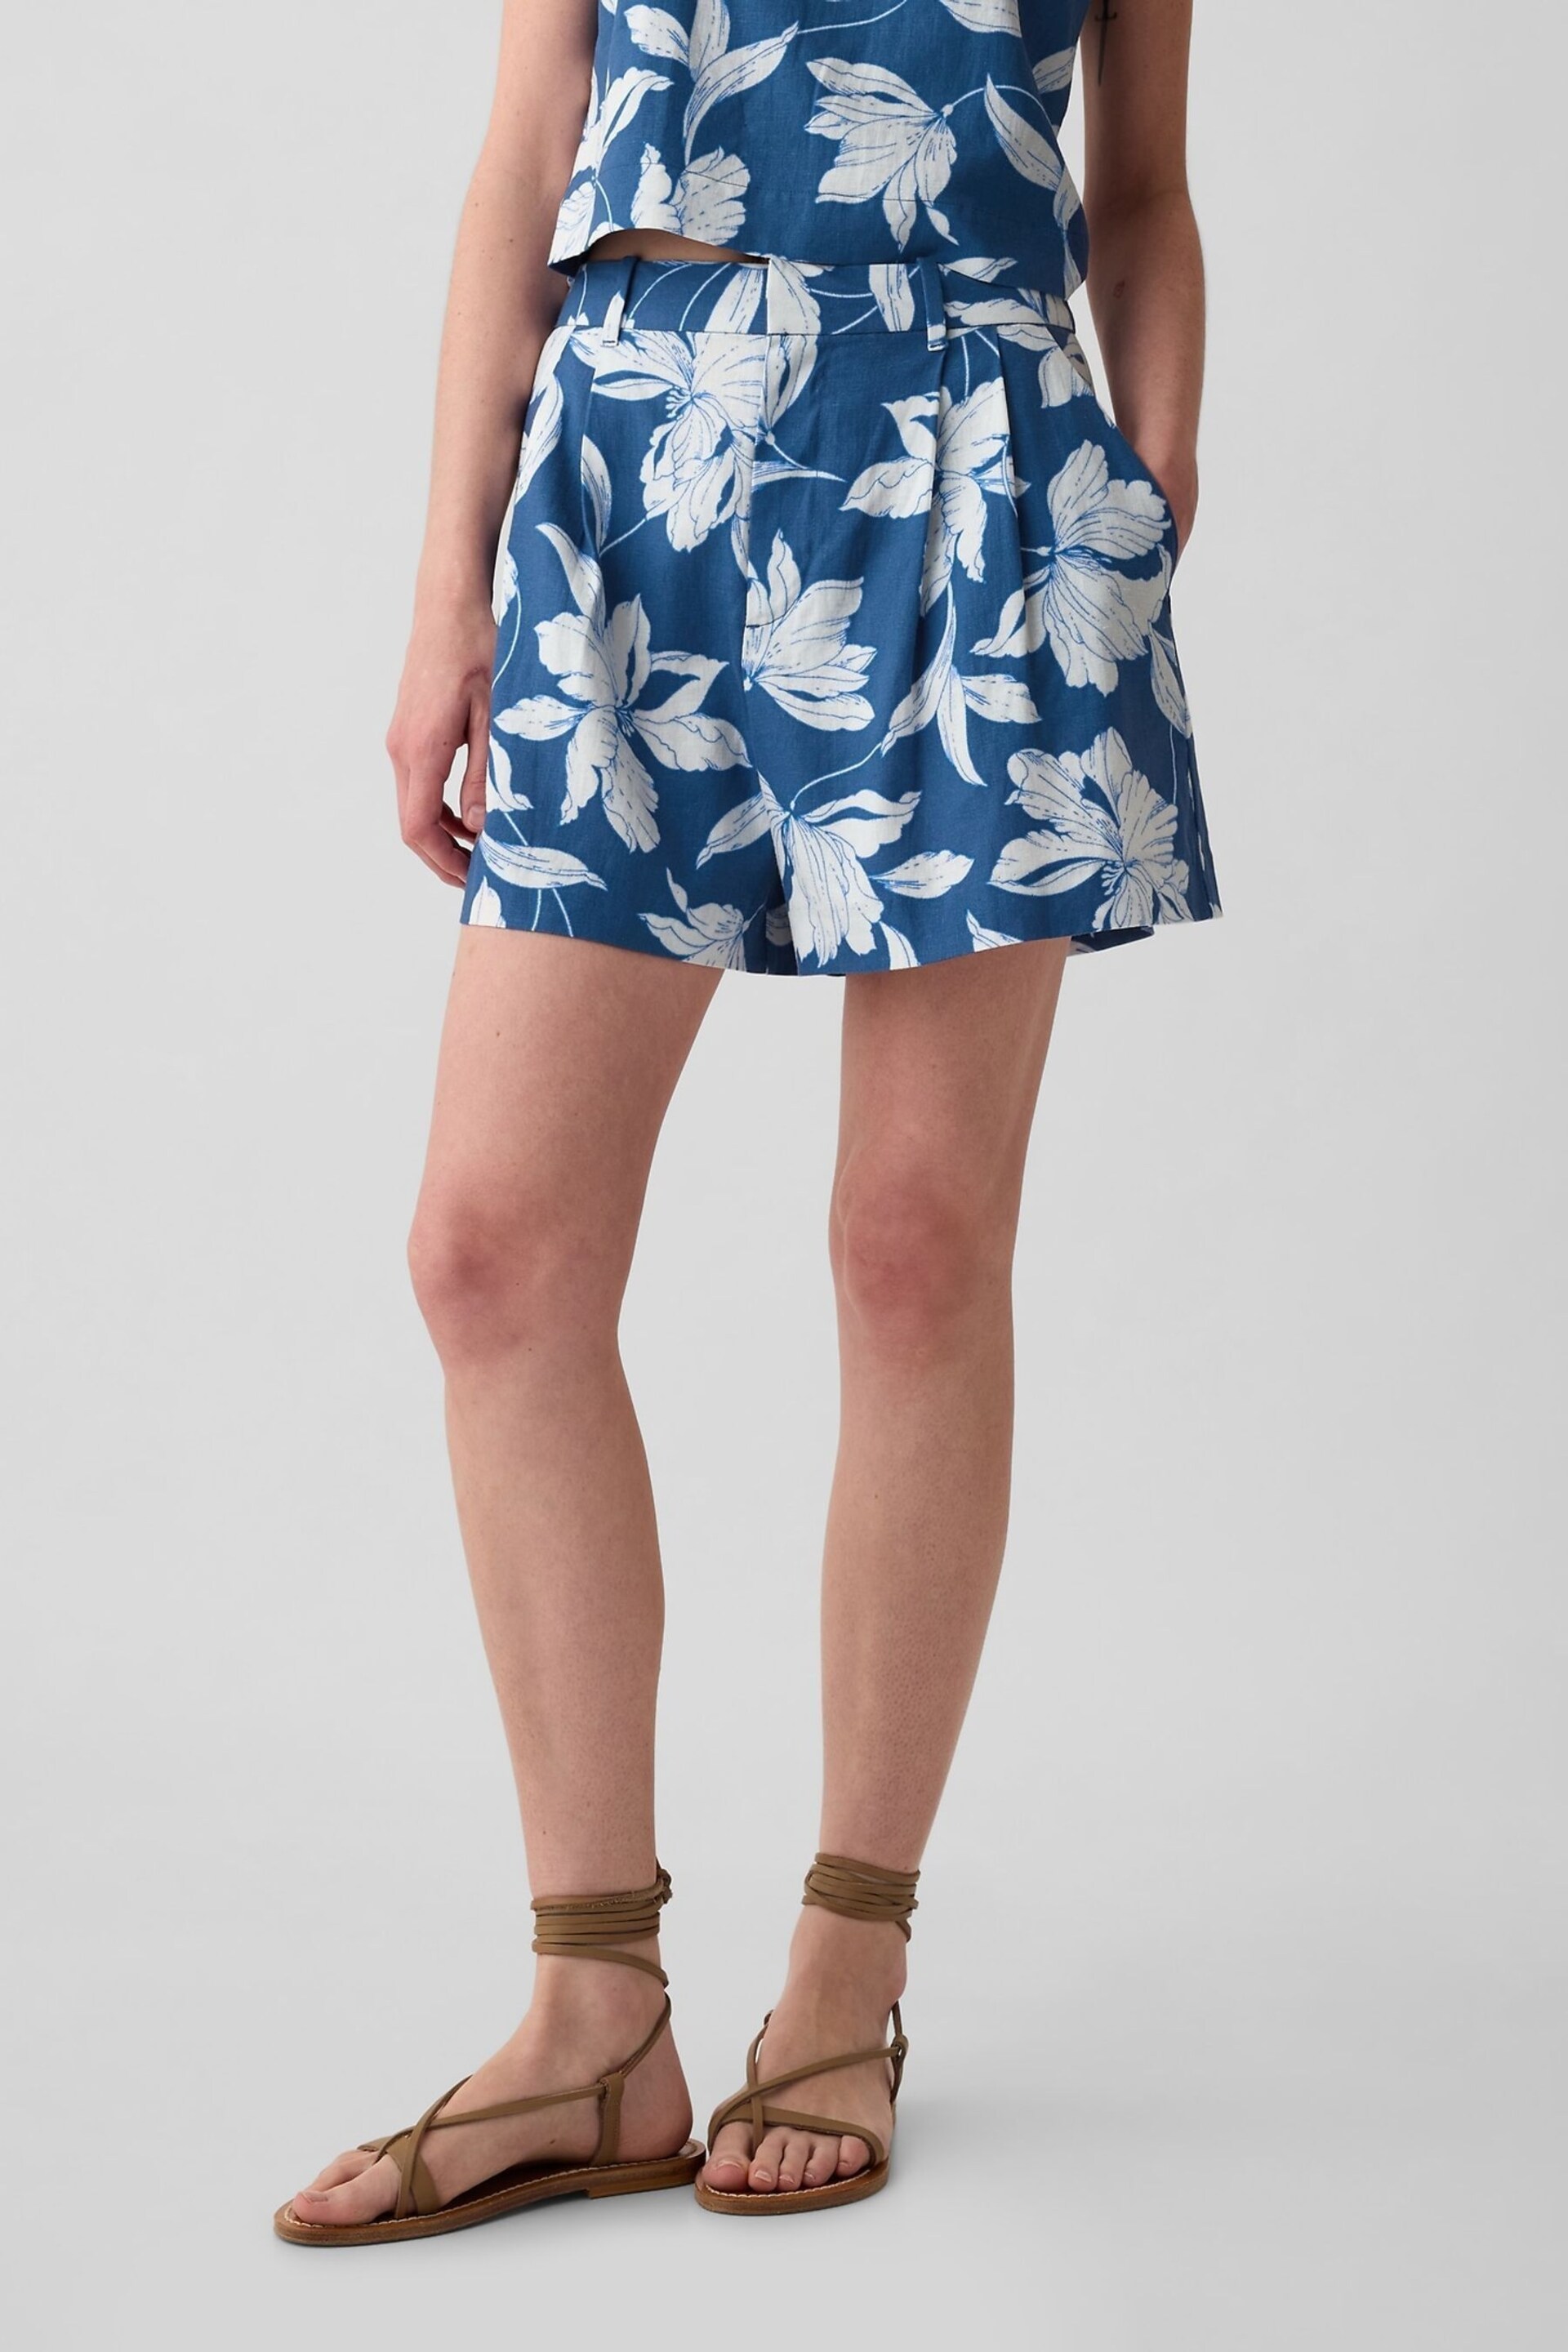 Gap Blue Floral 4" Linen Cotton Everyday Shorts - Image 1 of 5